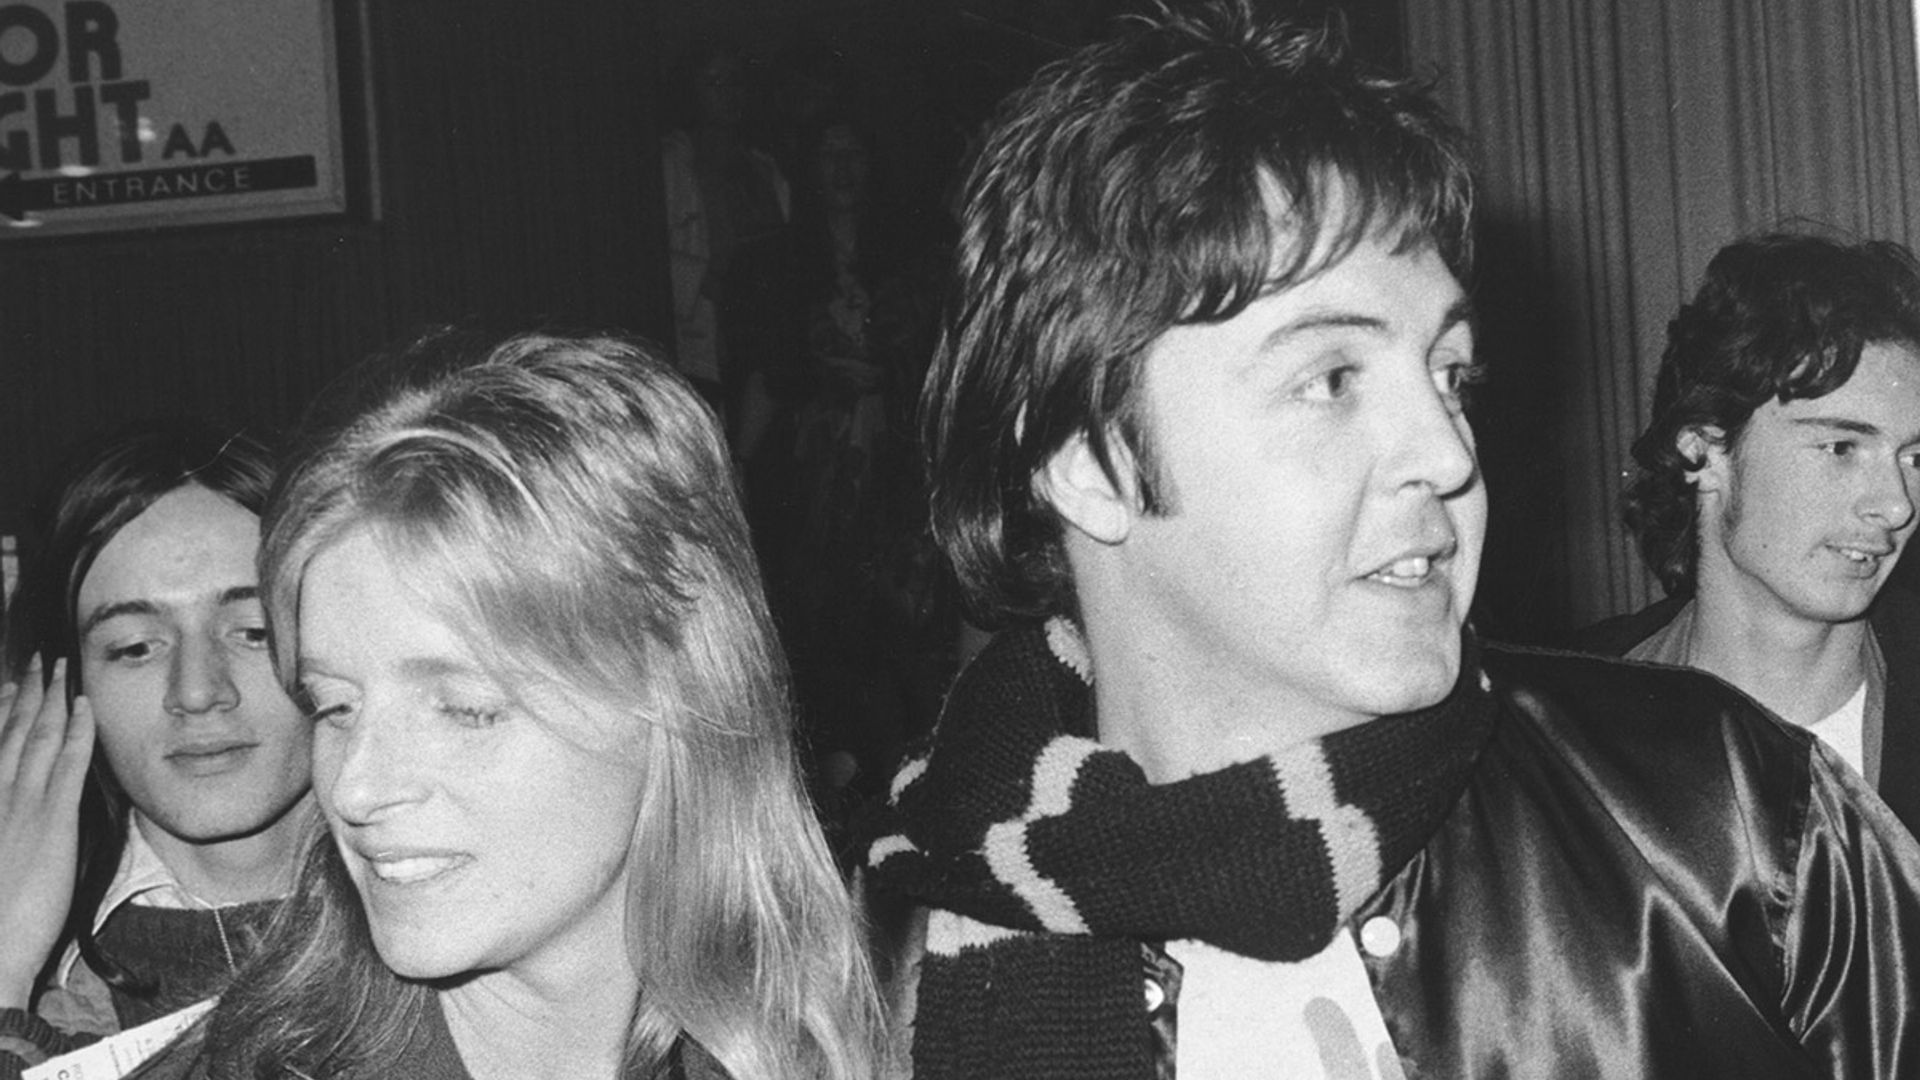 Paul McCartney remembers late wife Linda on special day